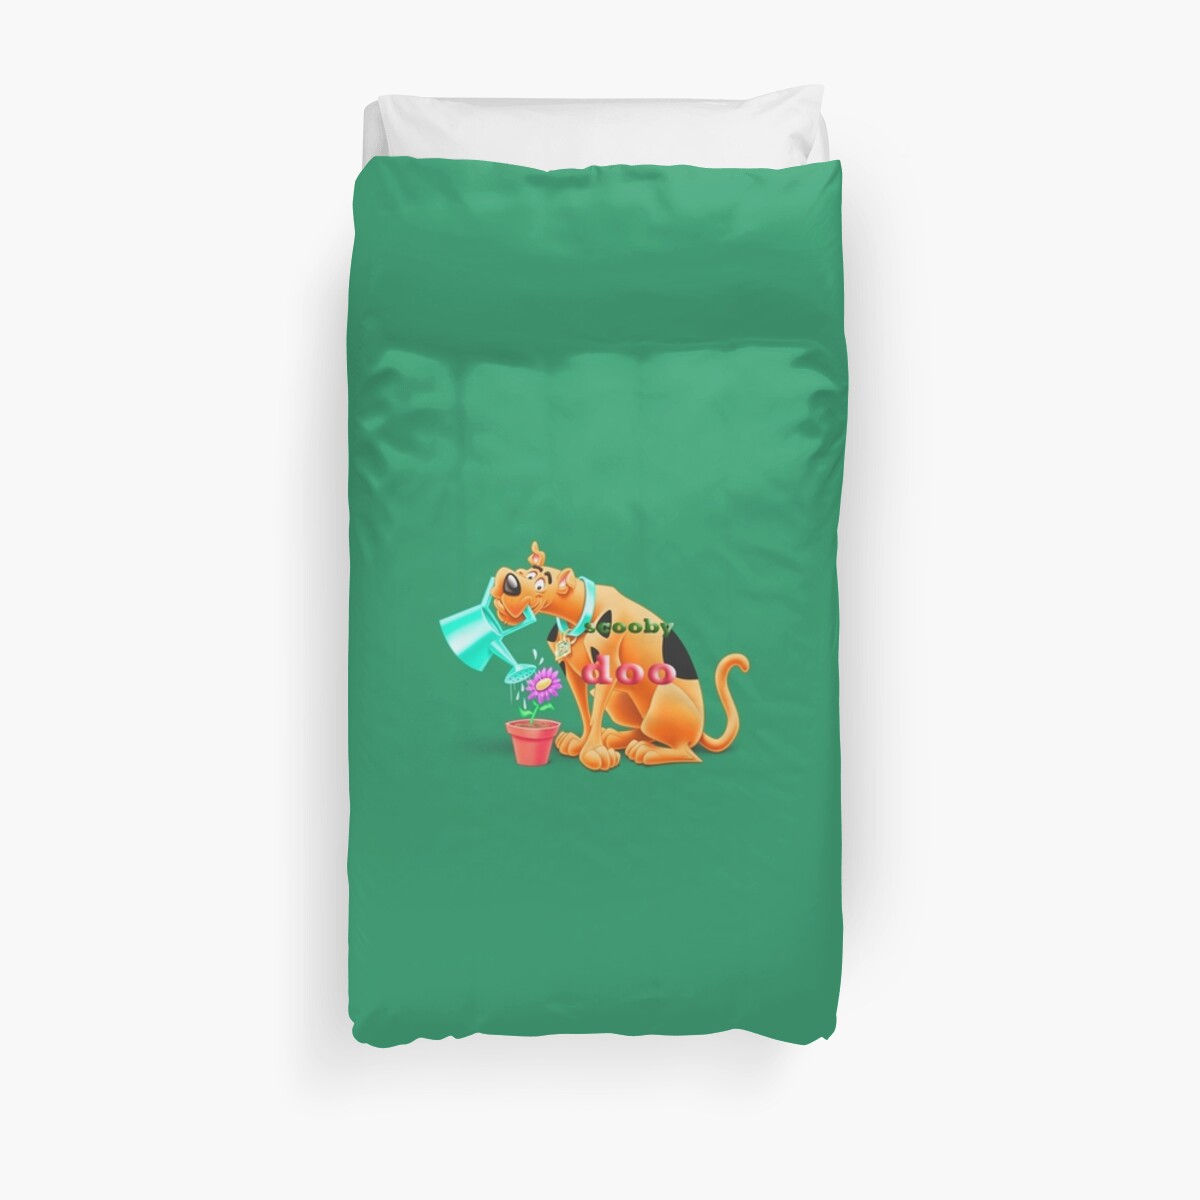 Scooby Doo Duvet Cover By Pek123 Redbubble